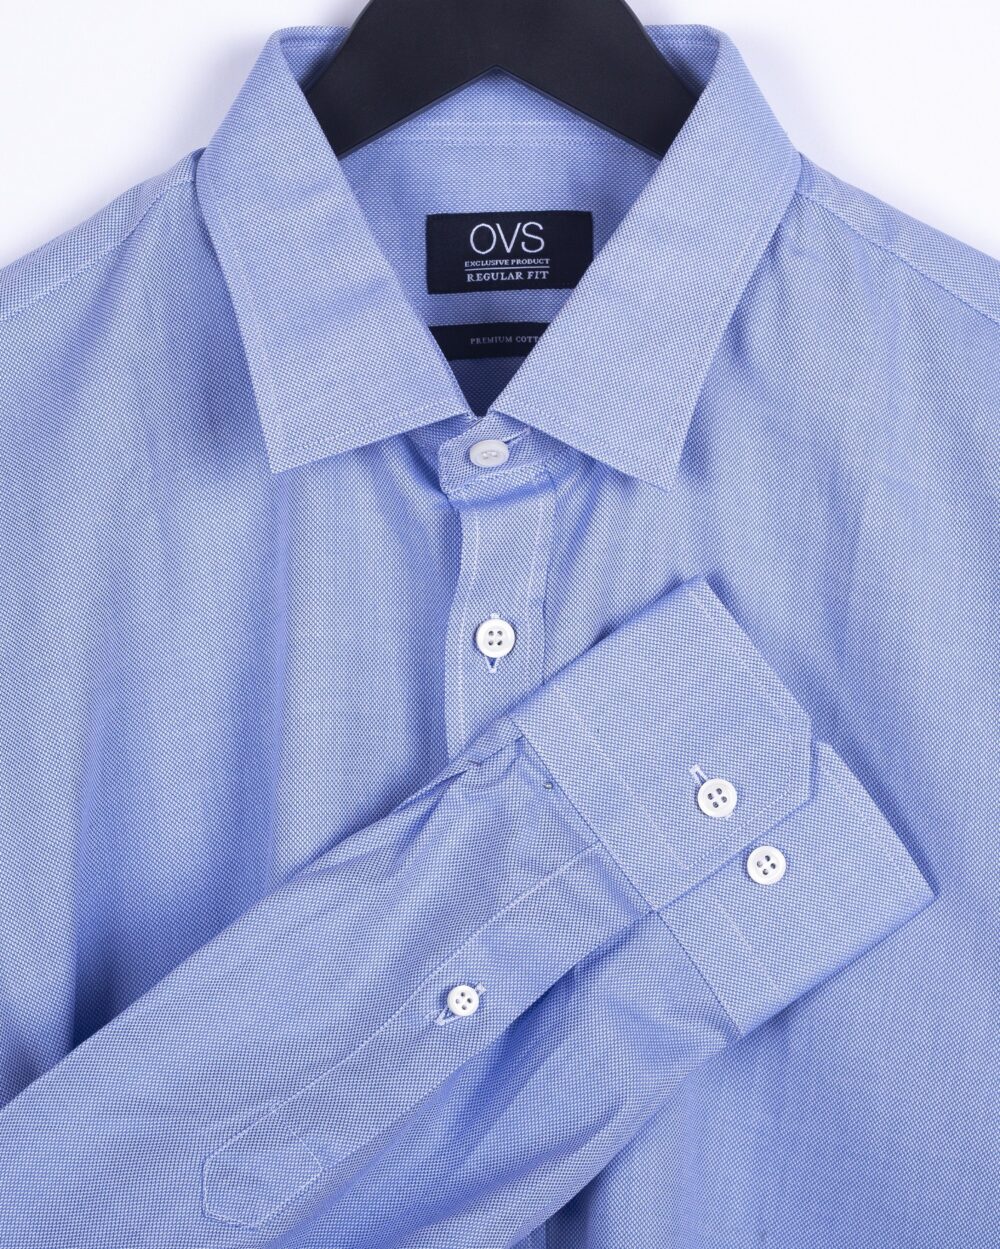 OVS Chemise homme